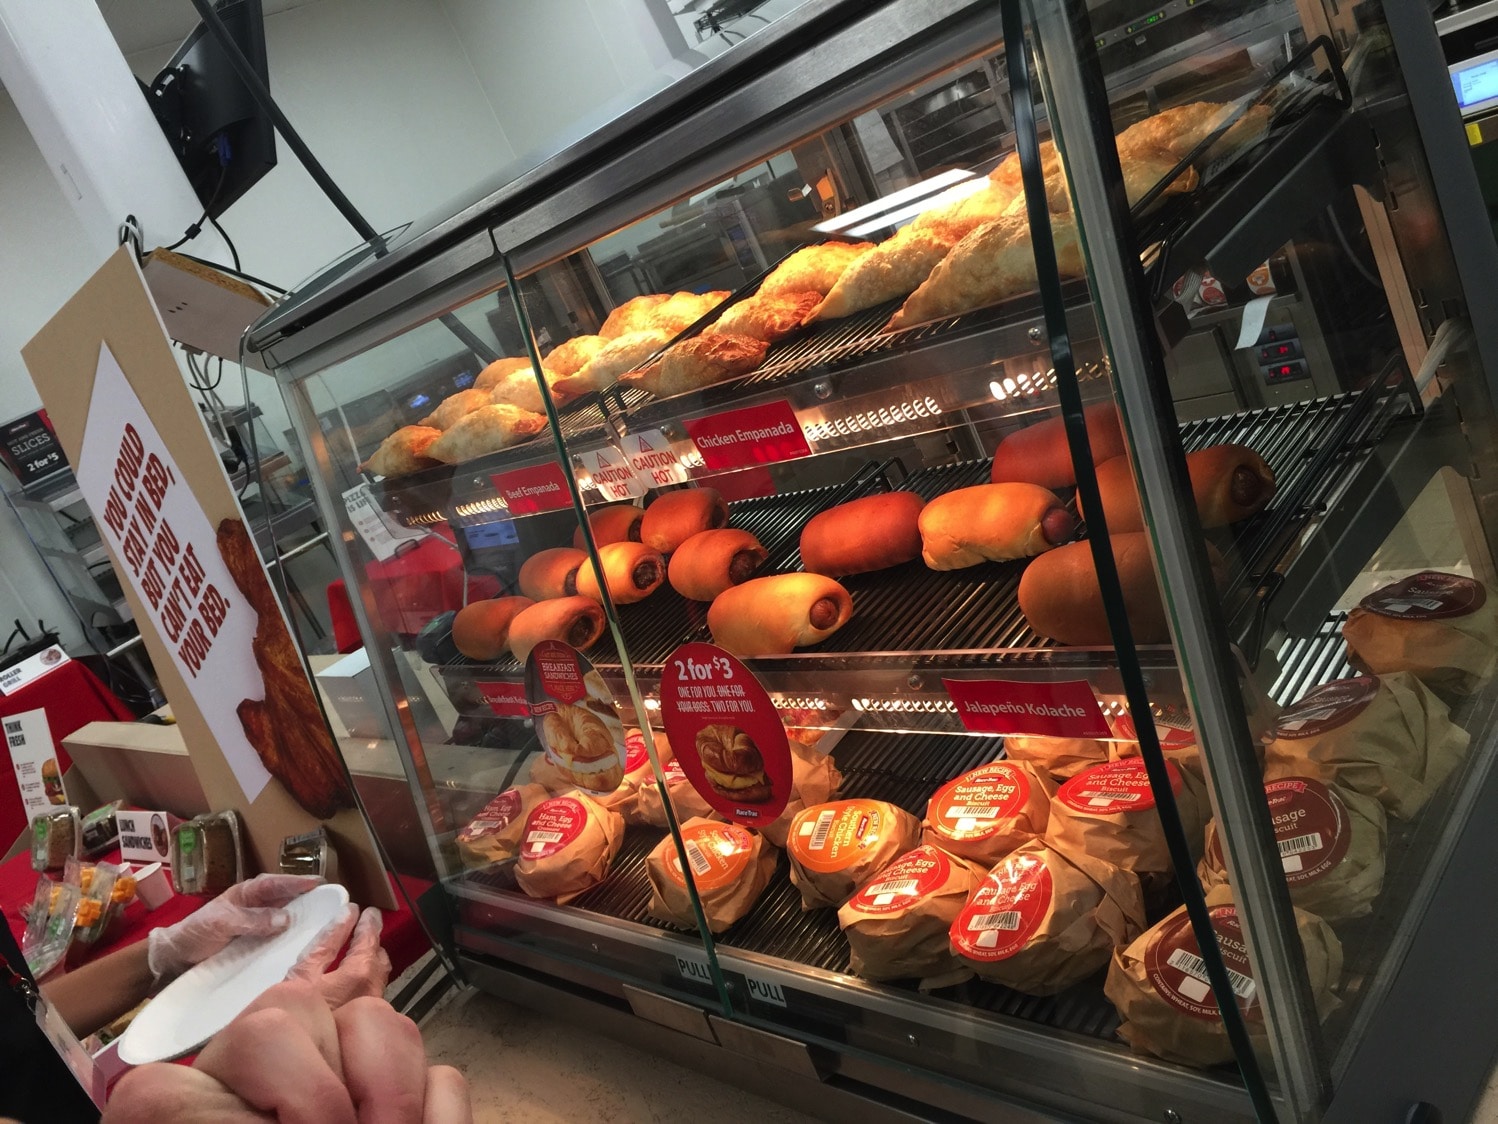 kolaches and hot items